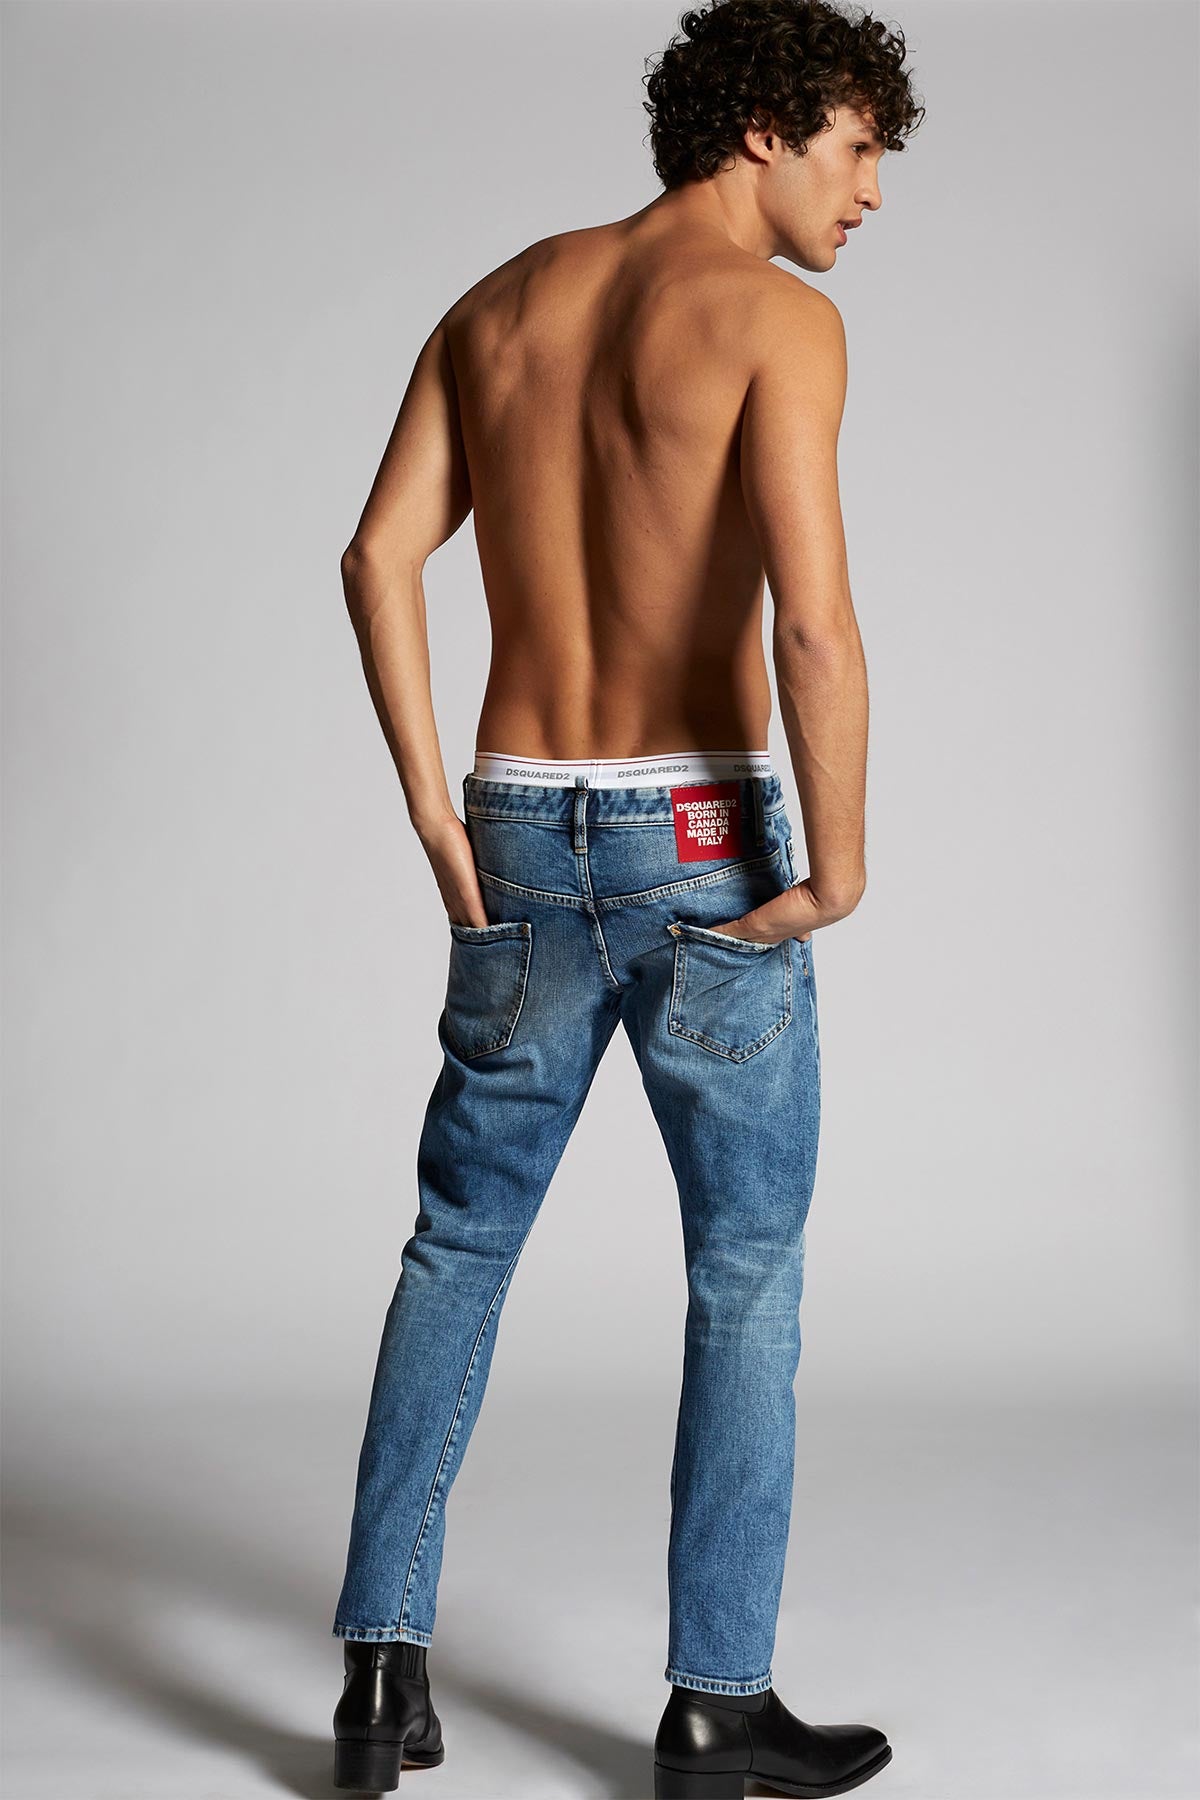 Dsquared Jeans-Libas Trendy Fashion Store